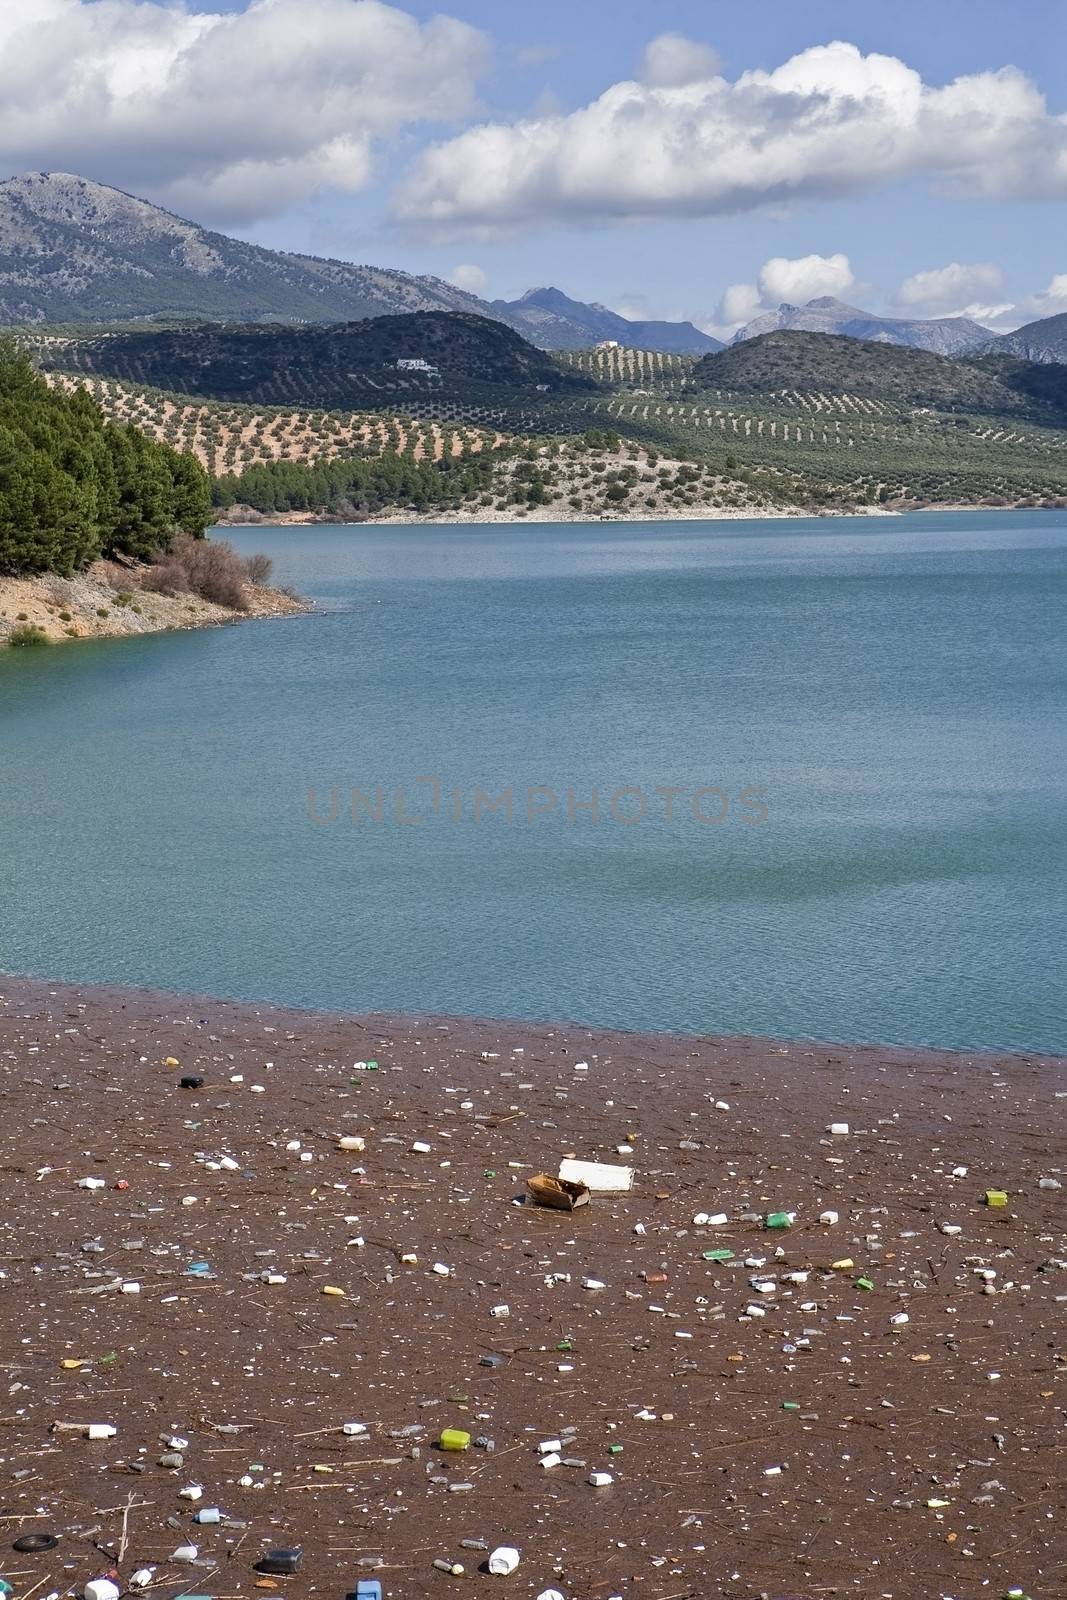 Residues and dirt accumulated in the reservoir of Iznajar, Cordoba province, Spain